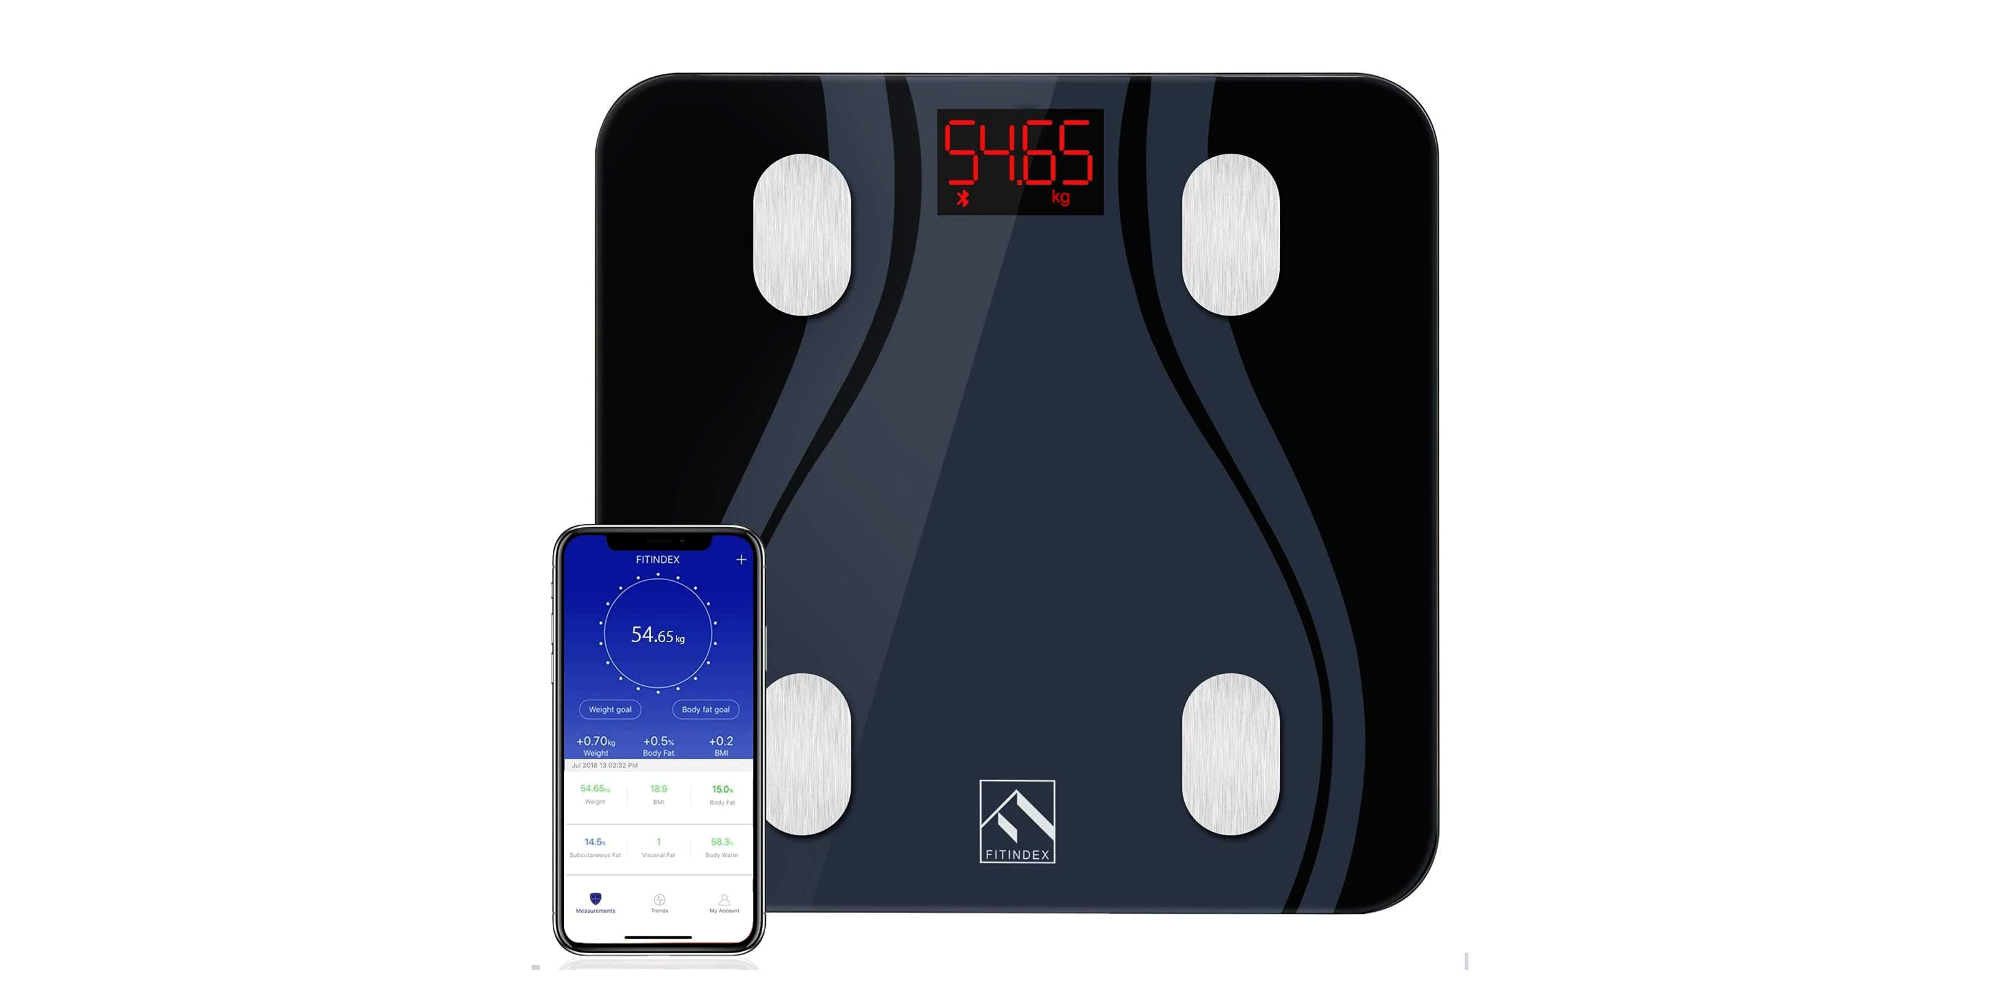 Bluetooth smart body scale INSMART compatible to Fitbit Samsung